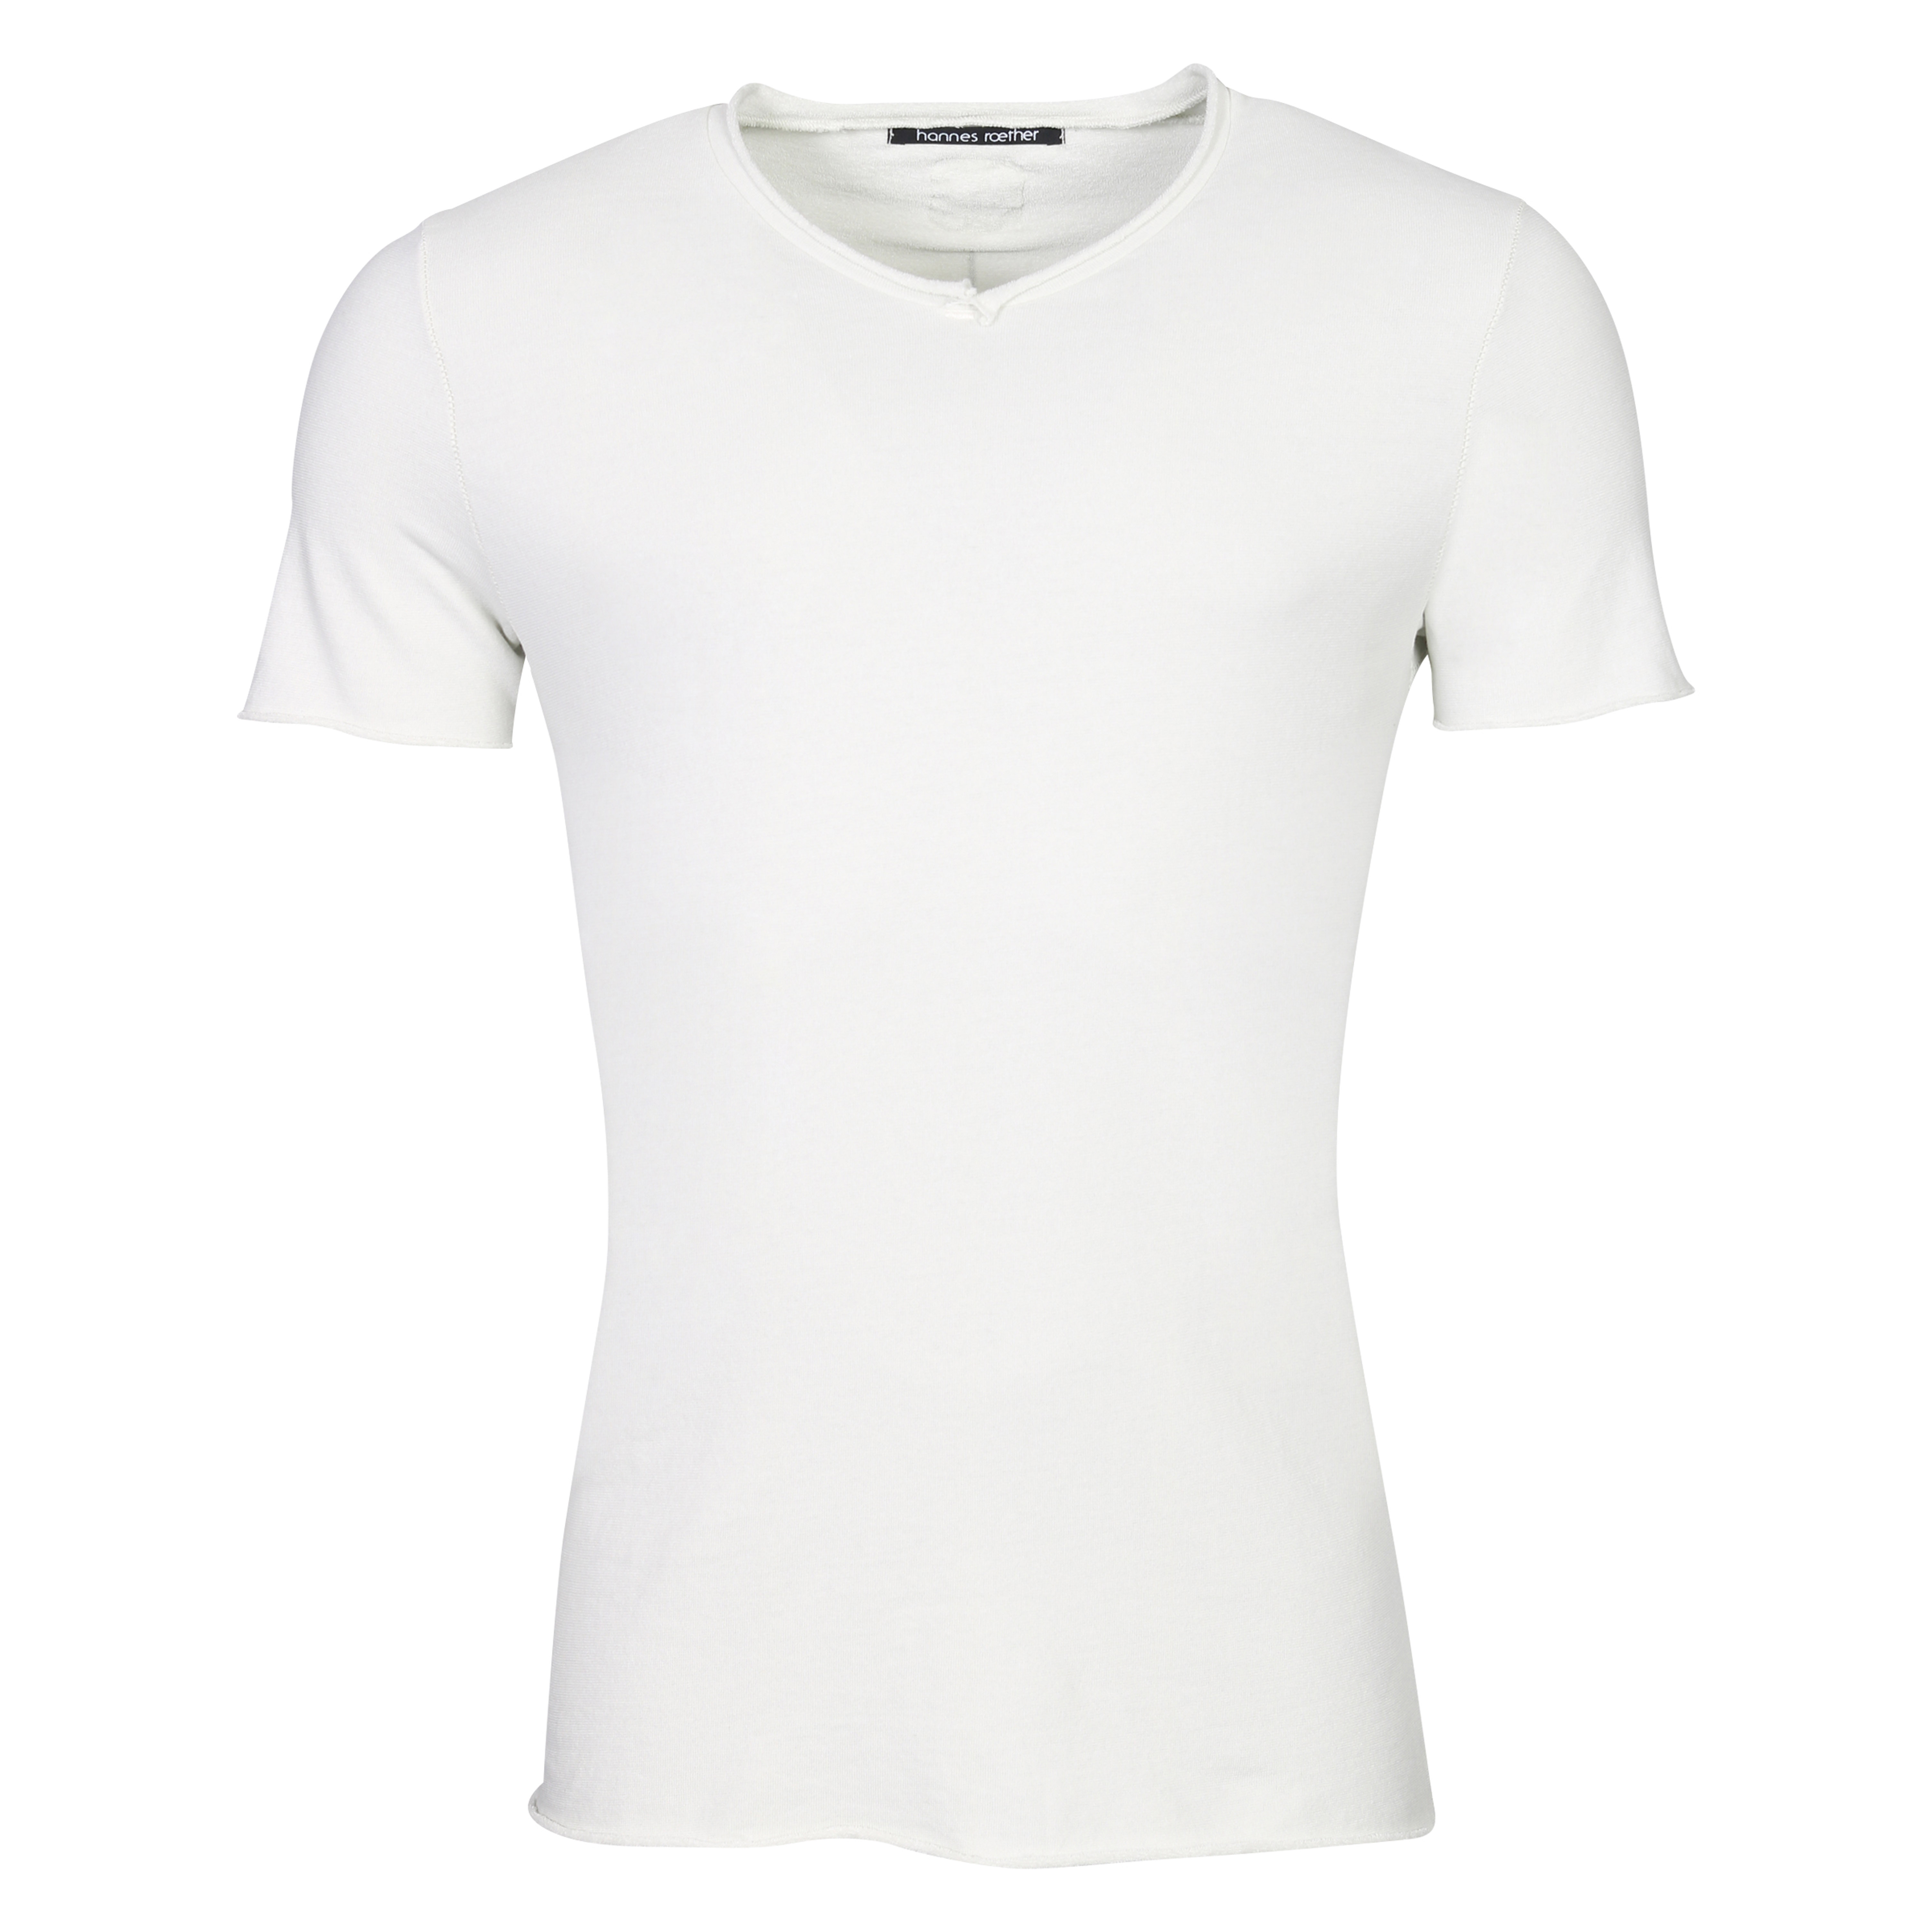 Hannes Roether Frottee V-Neck T-Shirt in Risotto